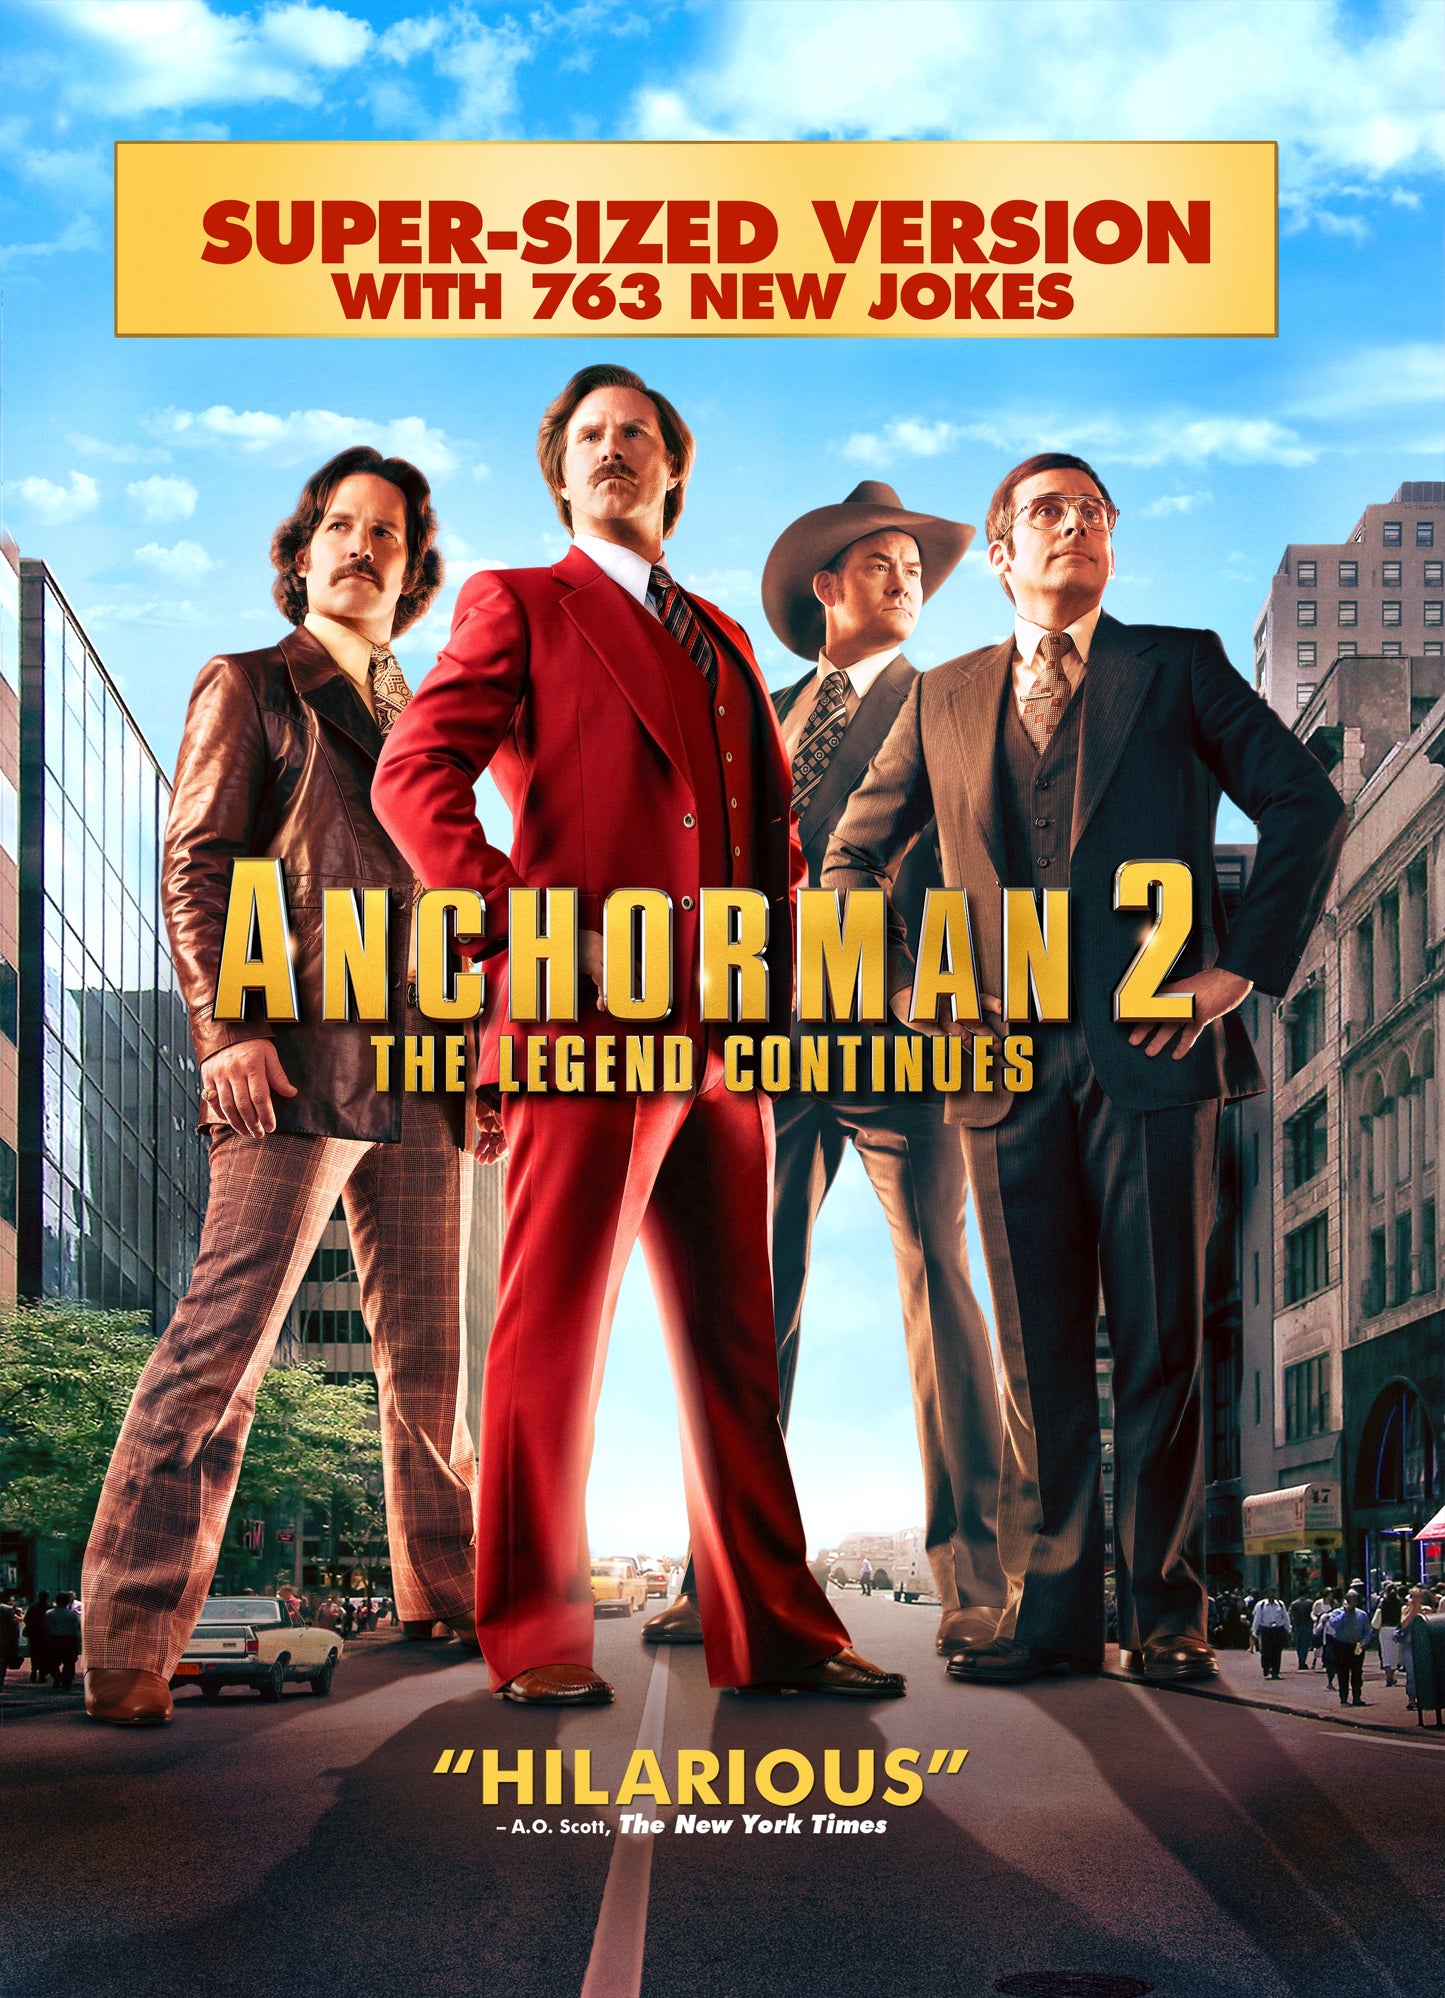 Anchorman 2: The Legend Continues Super-Sized Version